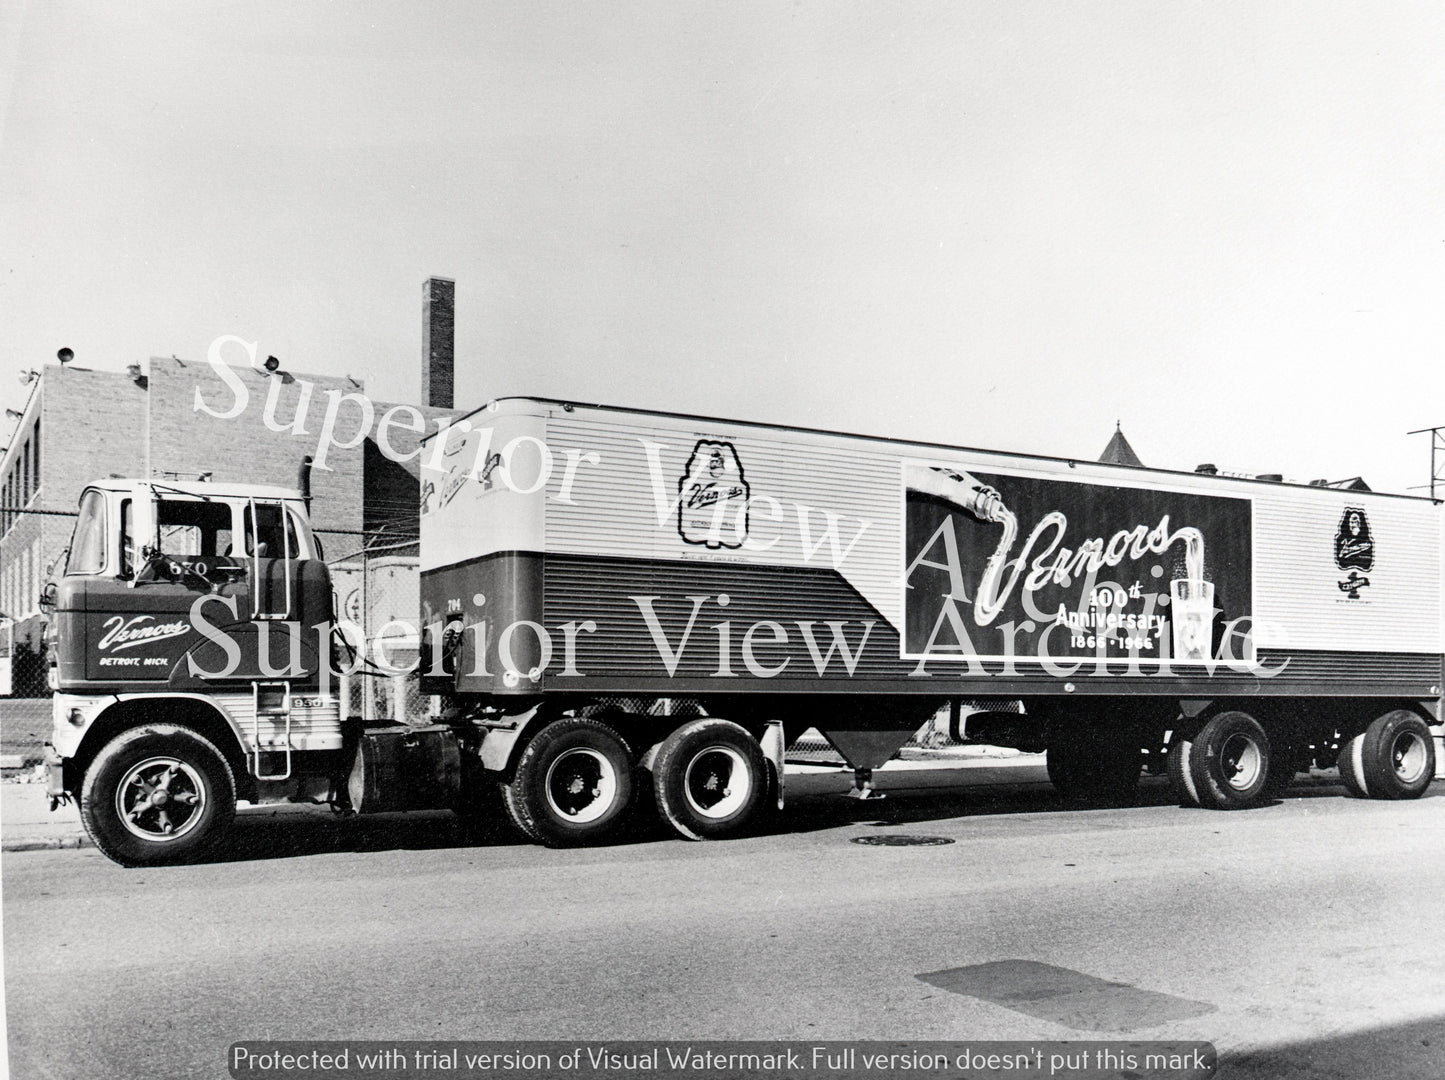 Vernors Ginger Ale Delivery Truck 100th Anniversary of Vernors Detroit 1966